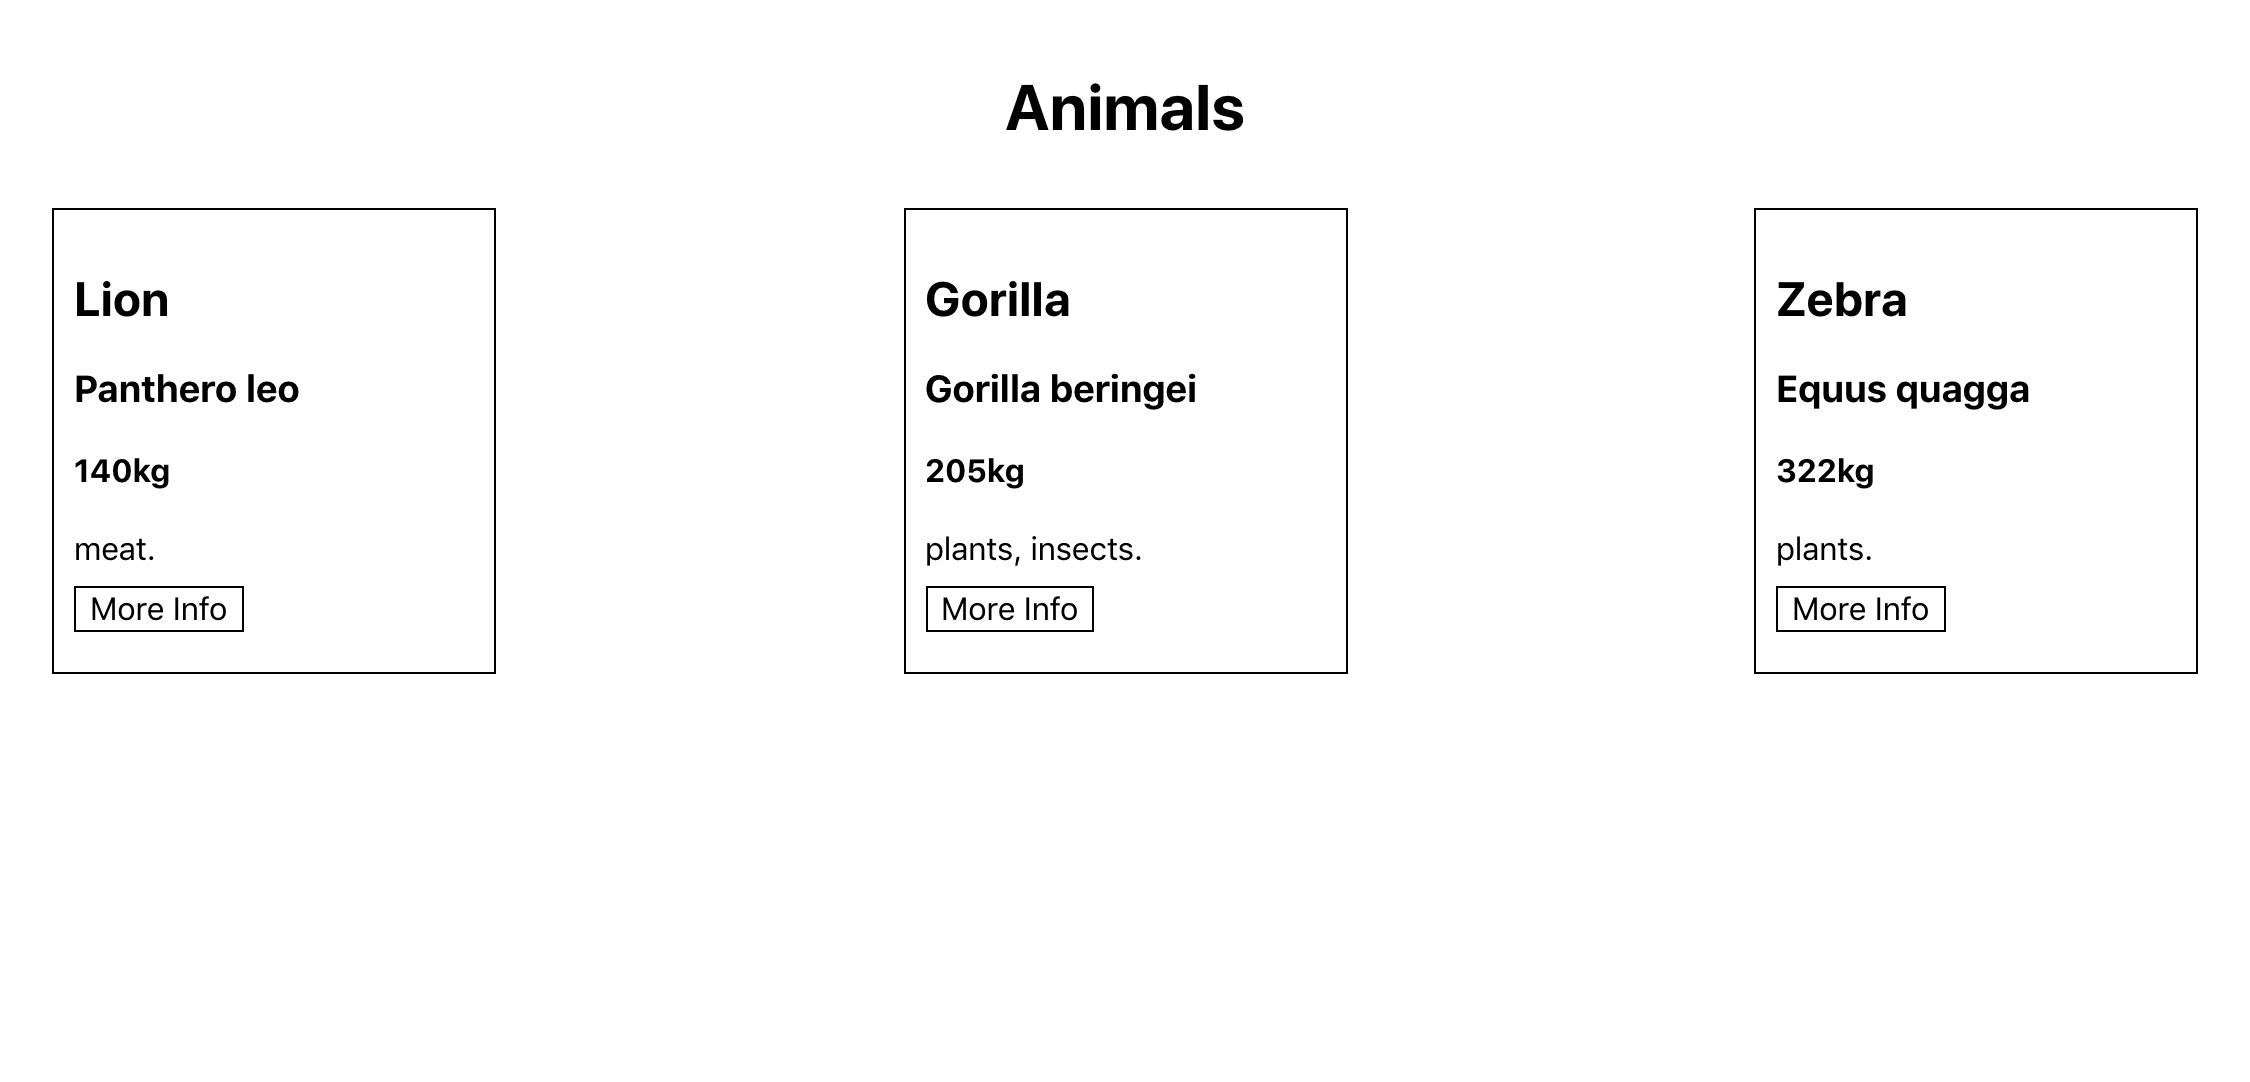 React project with styled animal cards